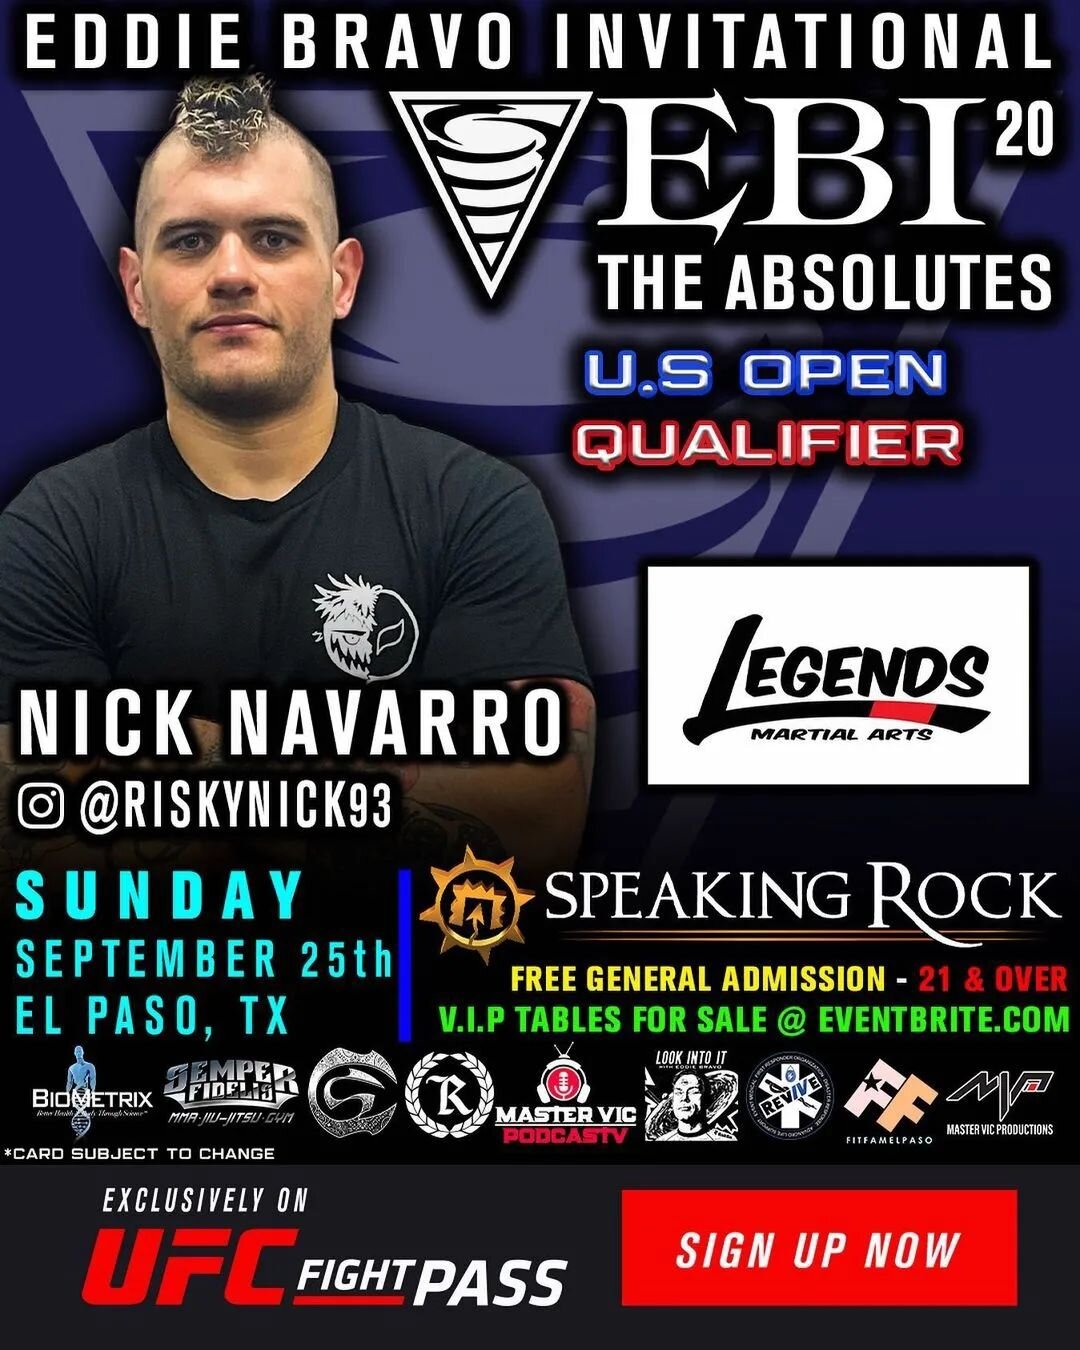 🚨 🚨 🚨 🚨
&bull;
@ebiofficial EBI 20: The Absolutes USA OPEN QUALIFIER 🇺🇸 featuring @riskynick93 representing Legends Martial Arts makes his way to El Paso, Tx next September 25th looking to take back home the EBI 20: USA Open Qualifier and earn 